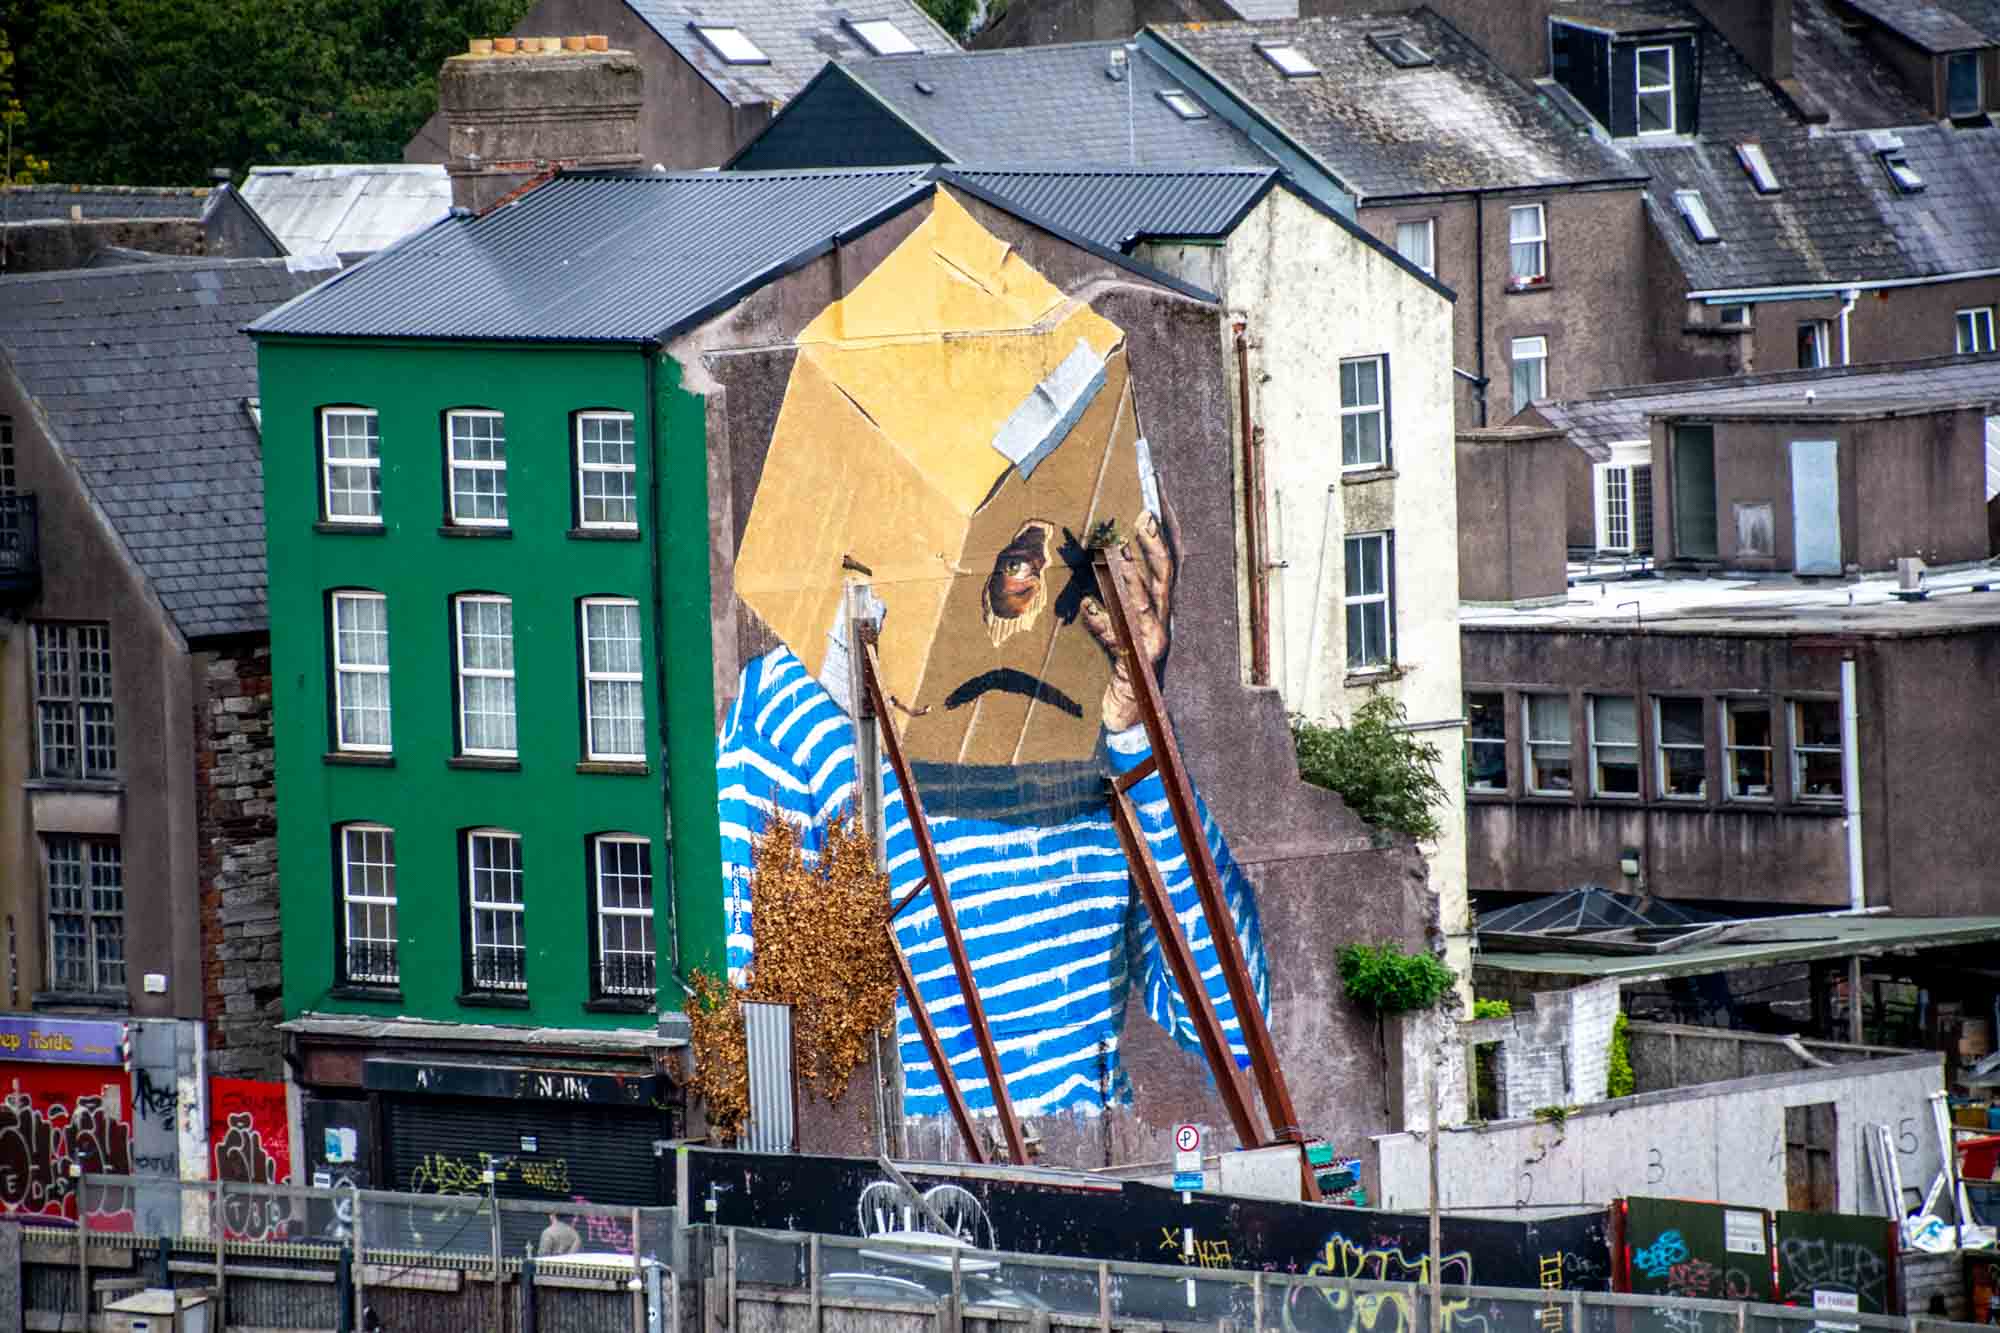 Street art mural of a person with a box on their head and one eye hole cut out